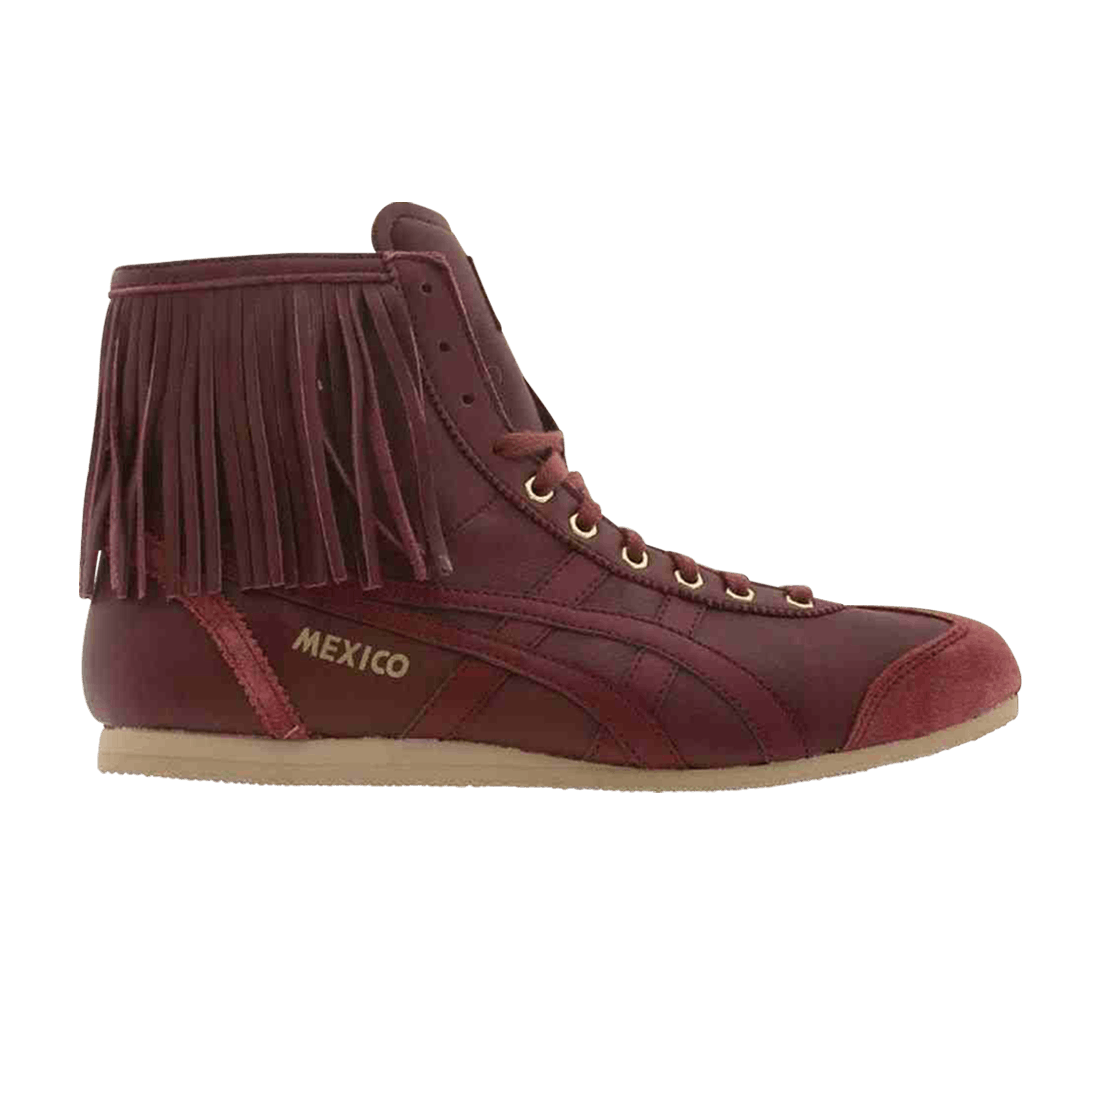 Wmns Mexico Mid Boots